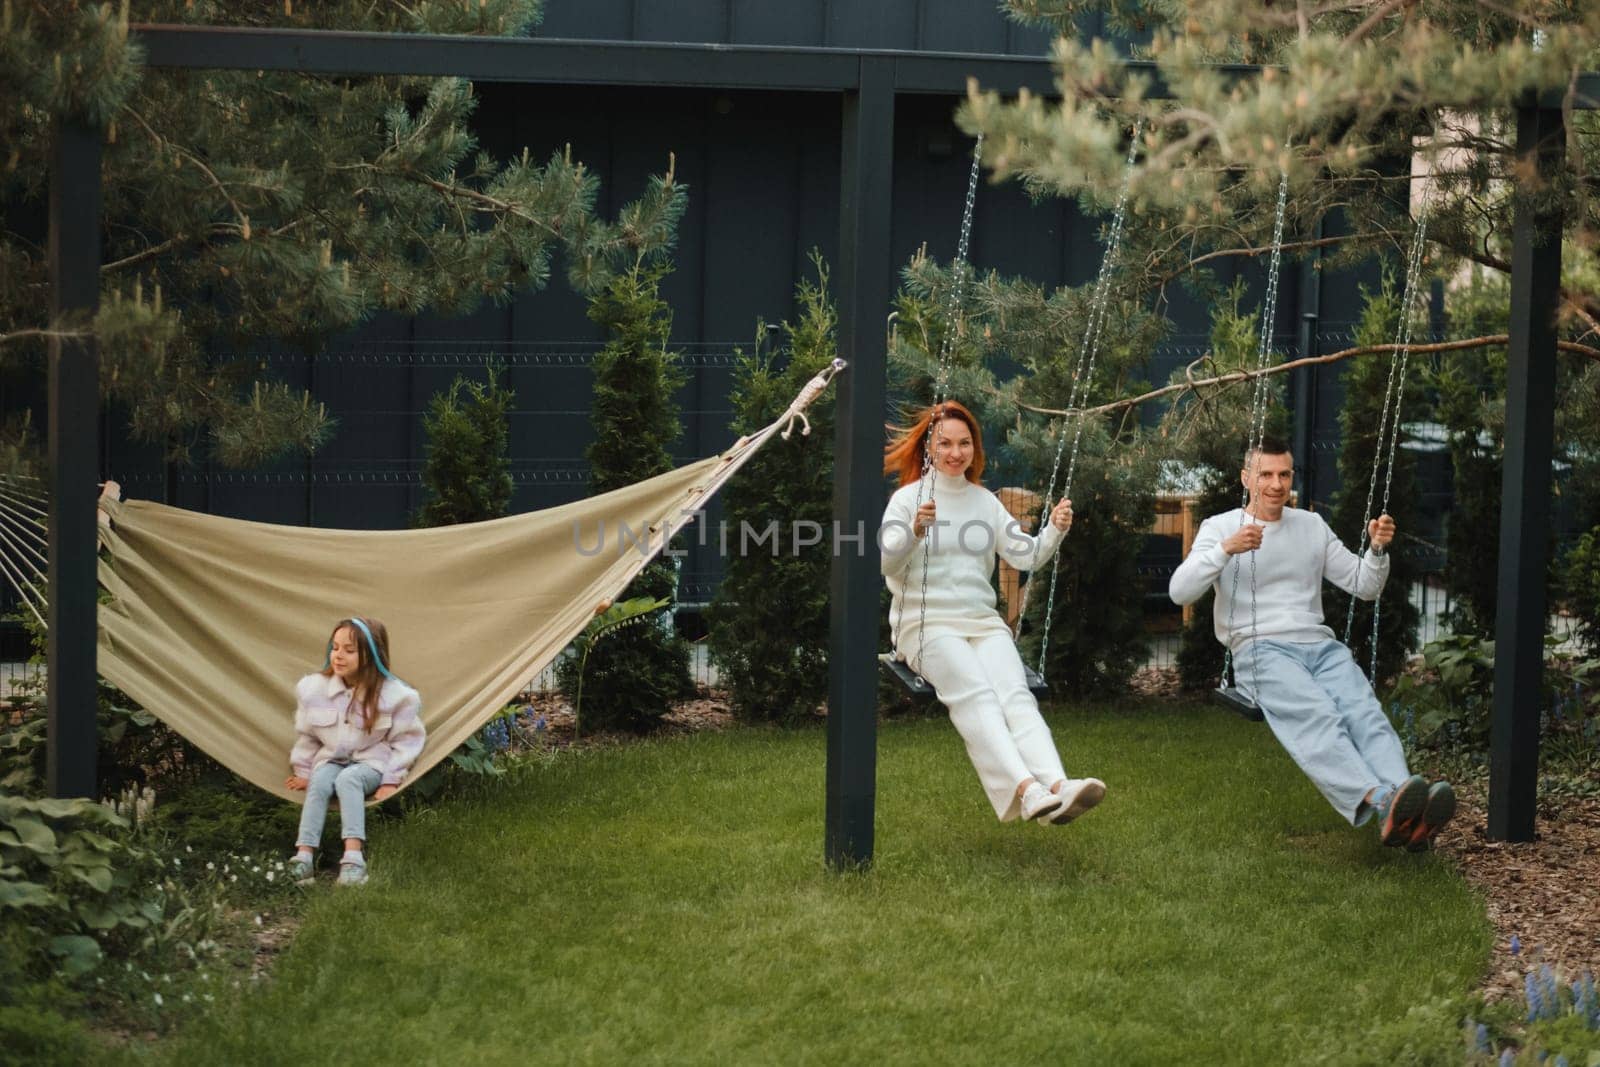 Mom and dad are riding on a swing, and their daughter is on a hammock next to them. The family is resting on a swing.